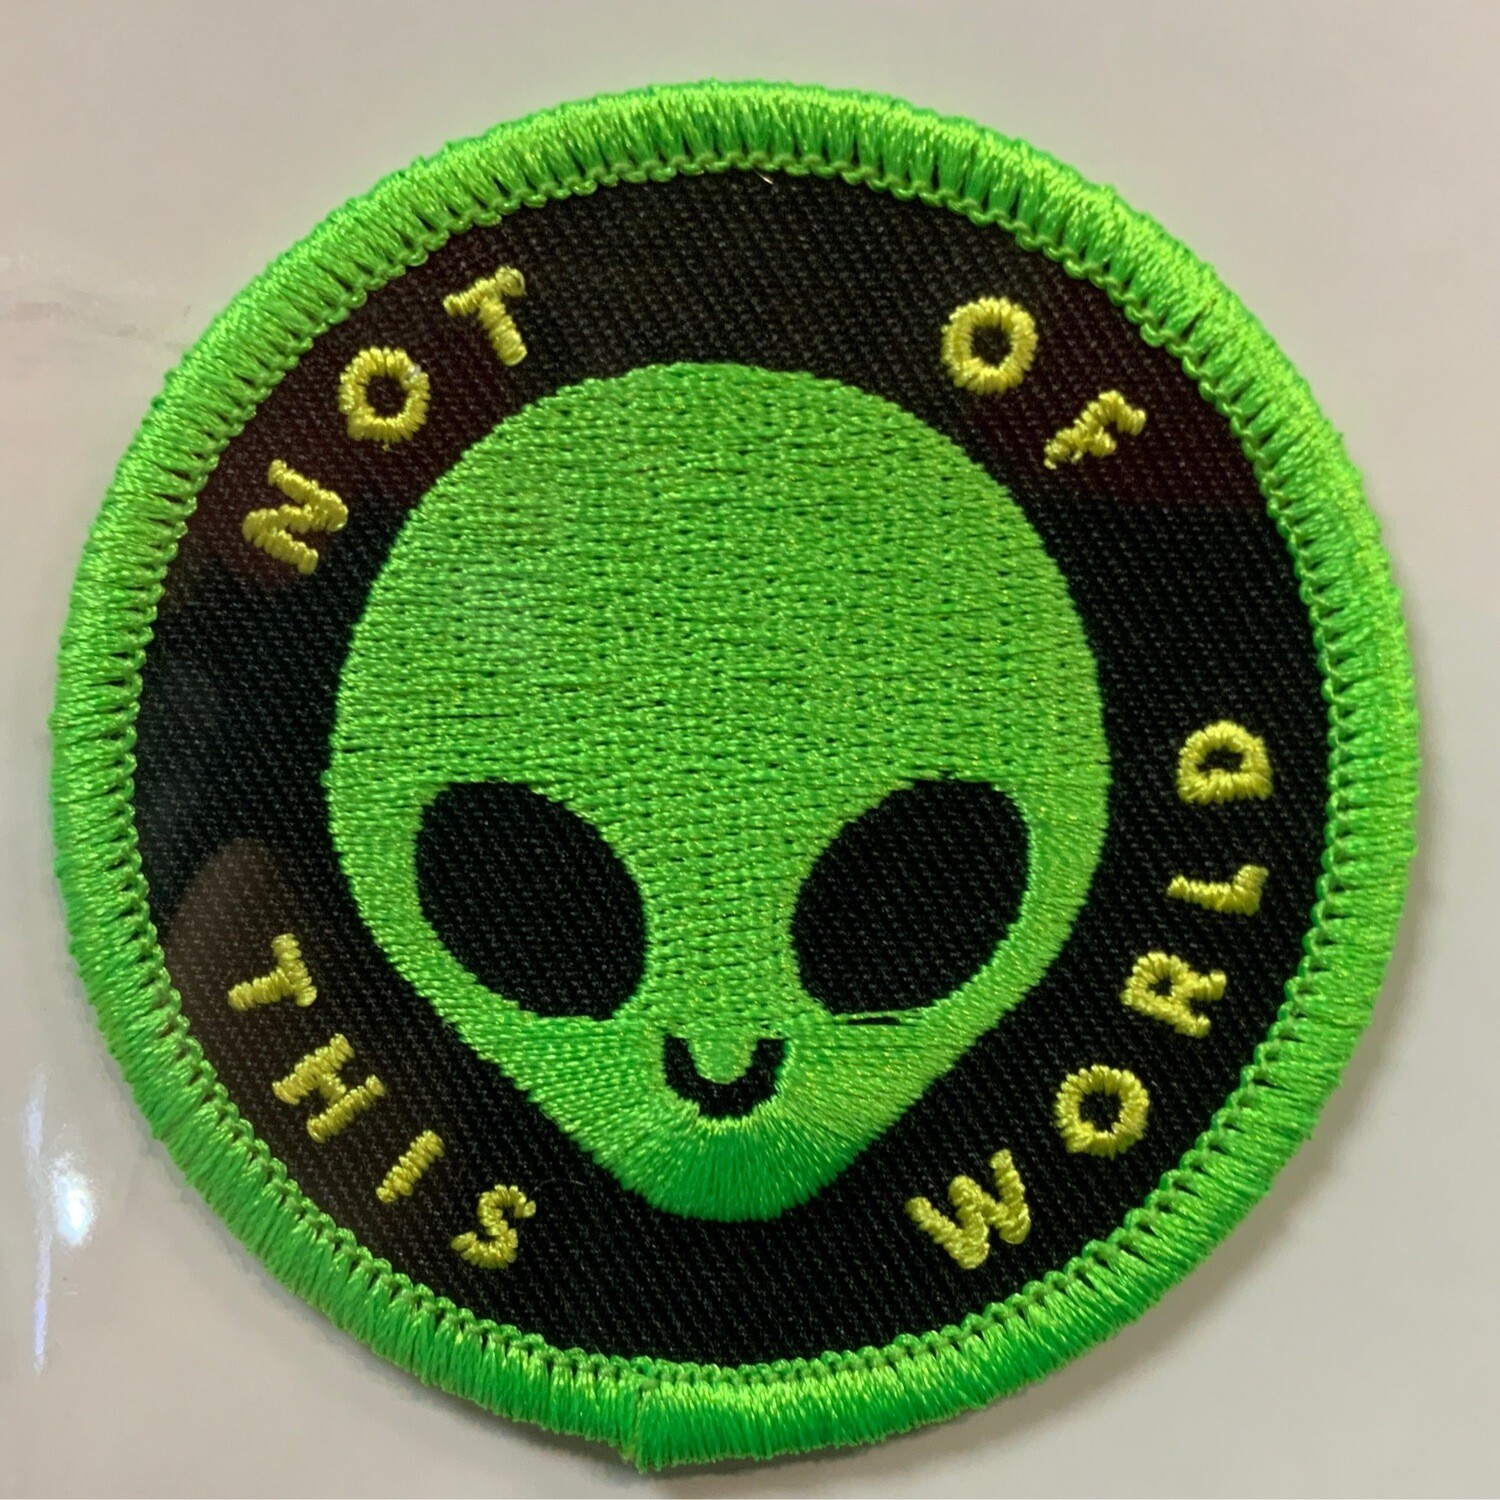 Not Of This World - Embroidered Patch from These Are Things